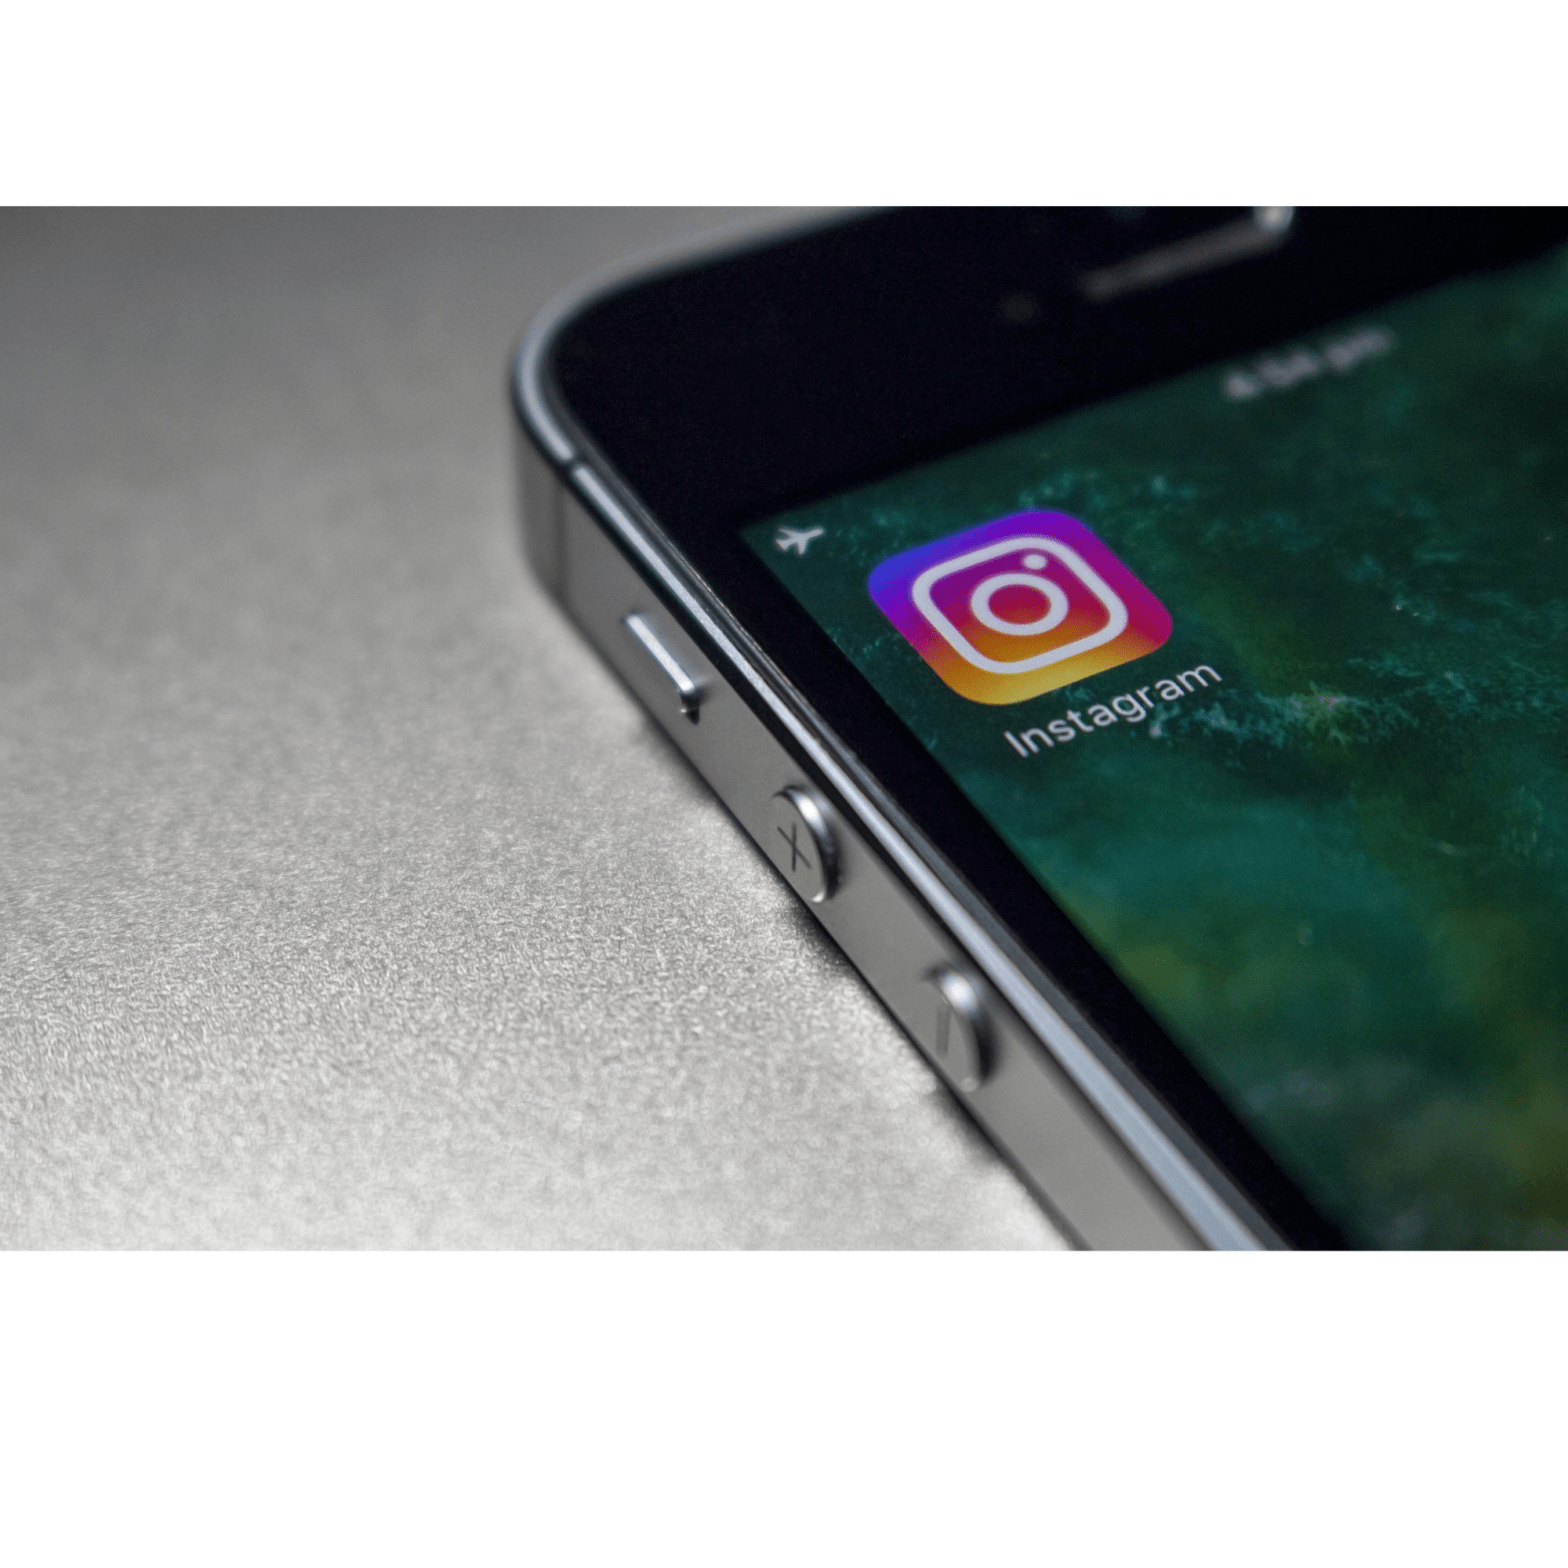 Instagram is changing the face of social media don't miss